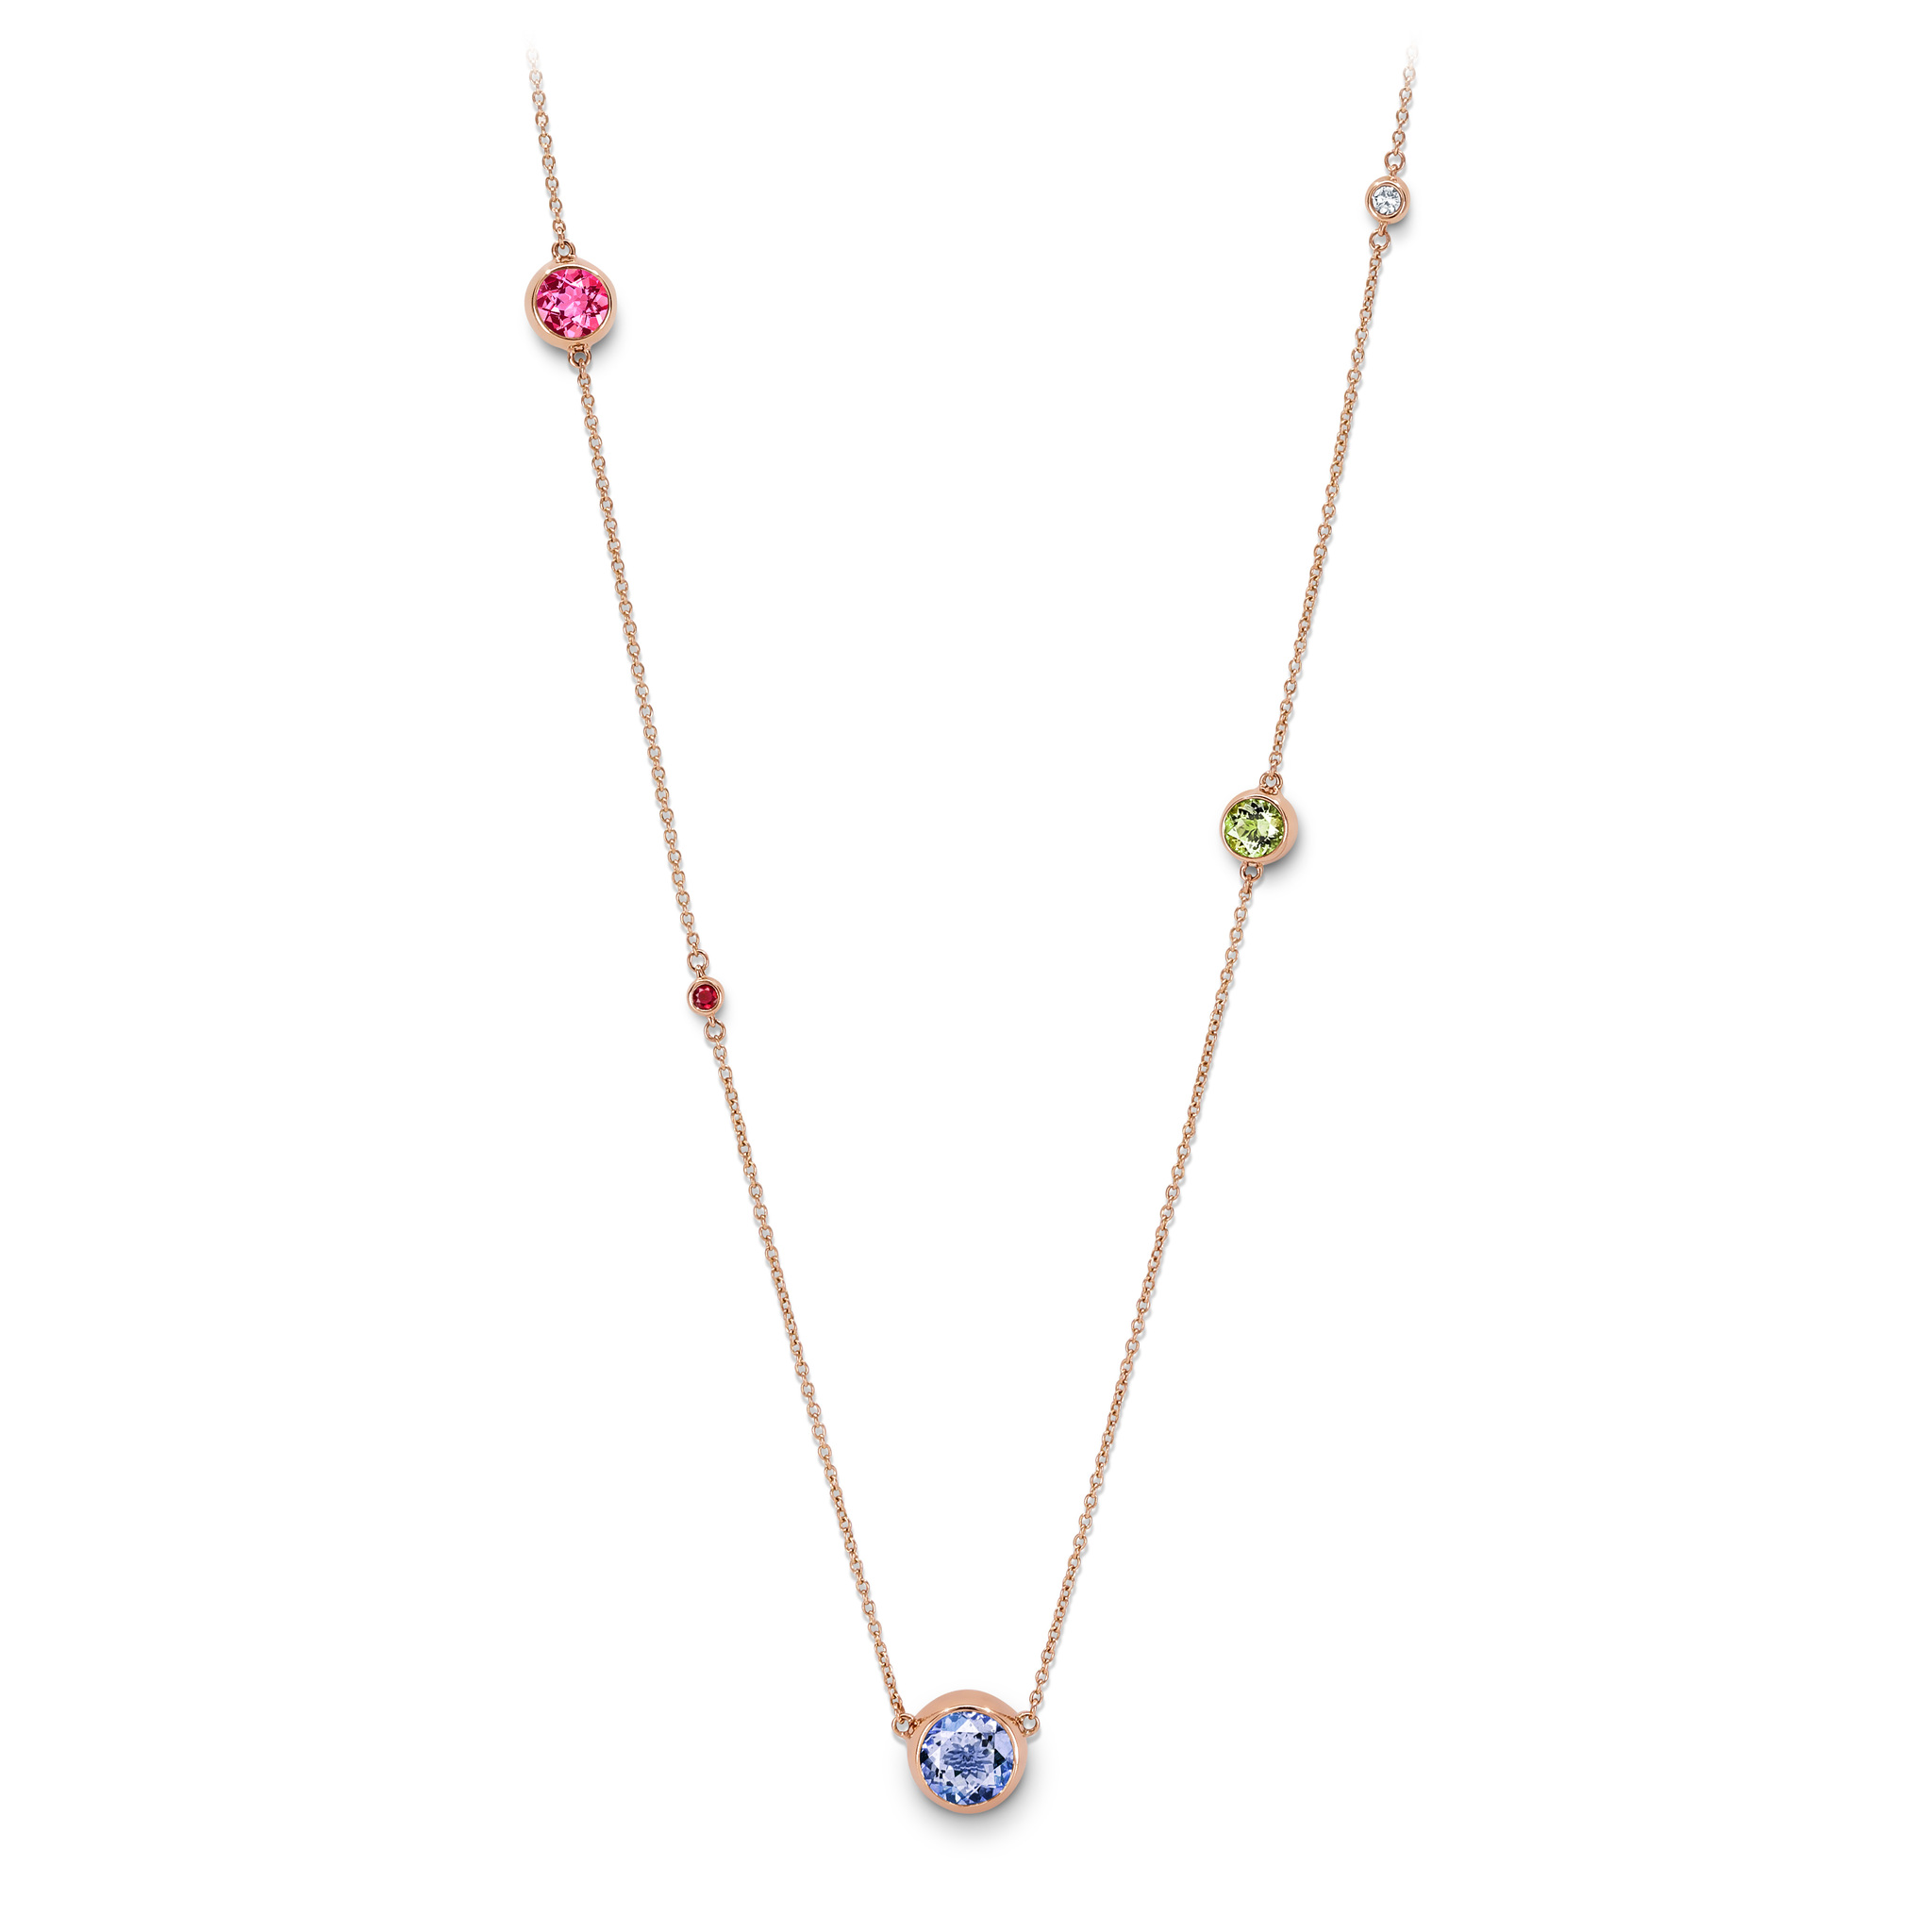 Necklace with coloured gemstones